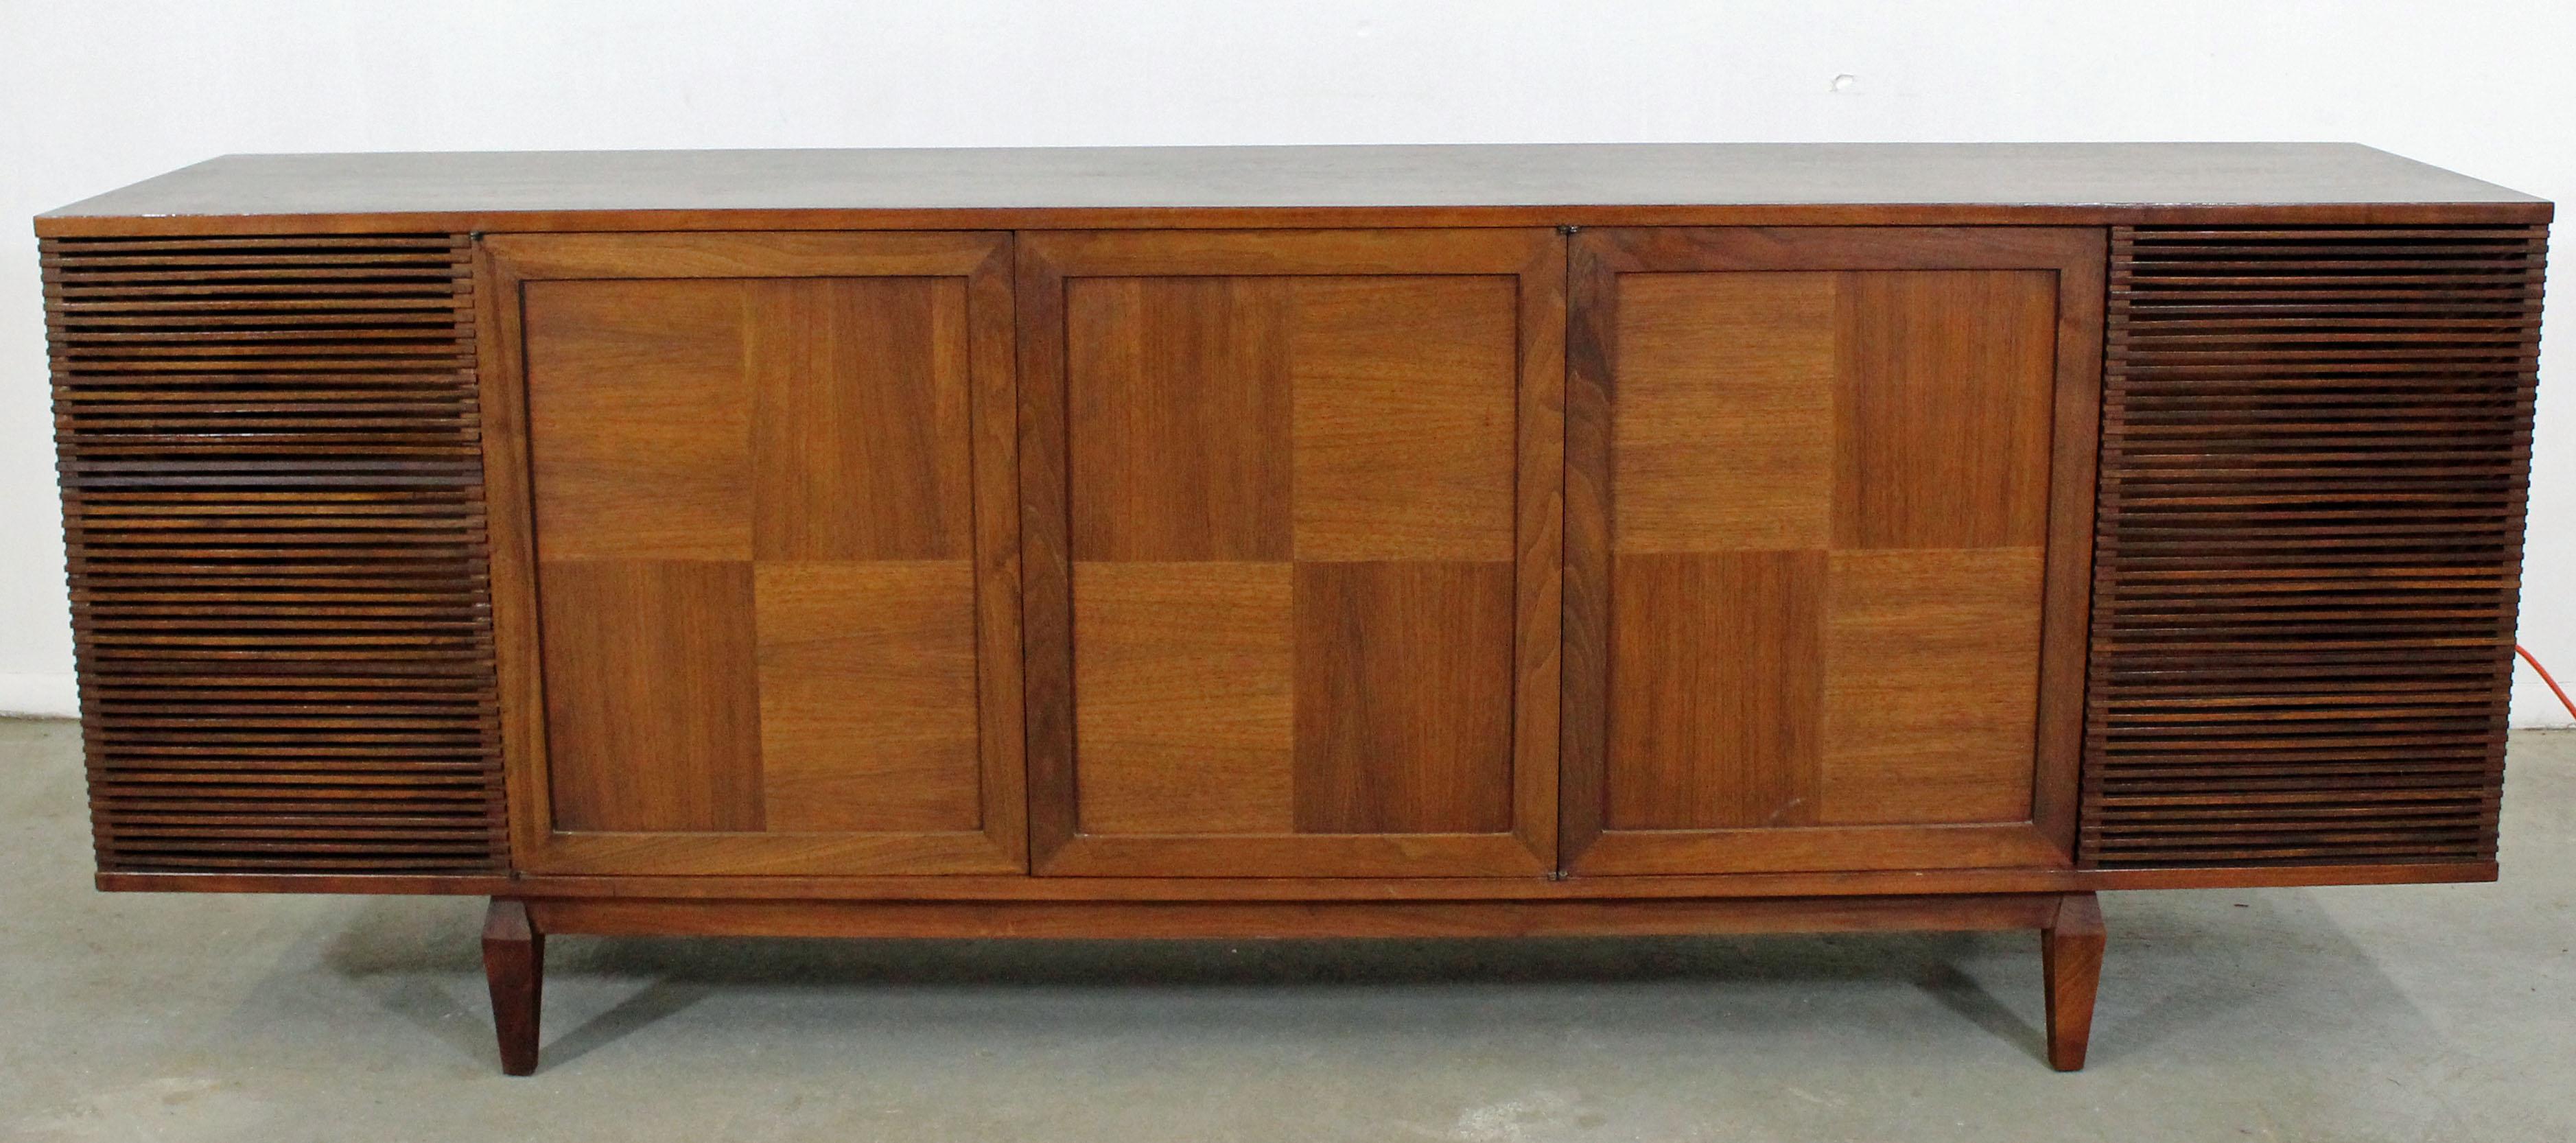 What a find. Offered is a customized credenza, formerly a record player/stereo, that's been turned into a bar cabinet. Features three doors with push latches that open up to a inside shelving and storage space with two empty cavities on each side